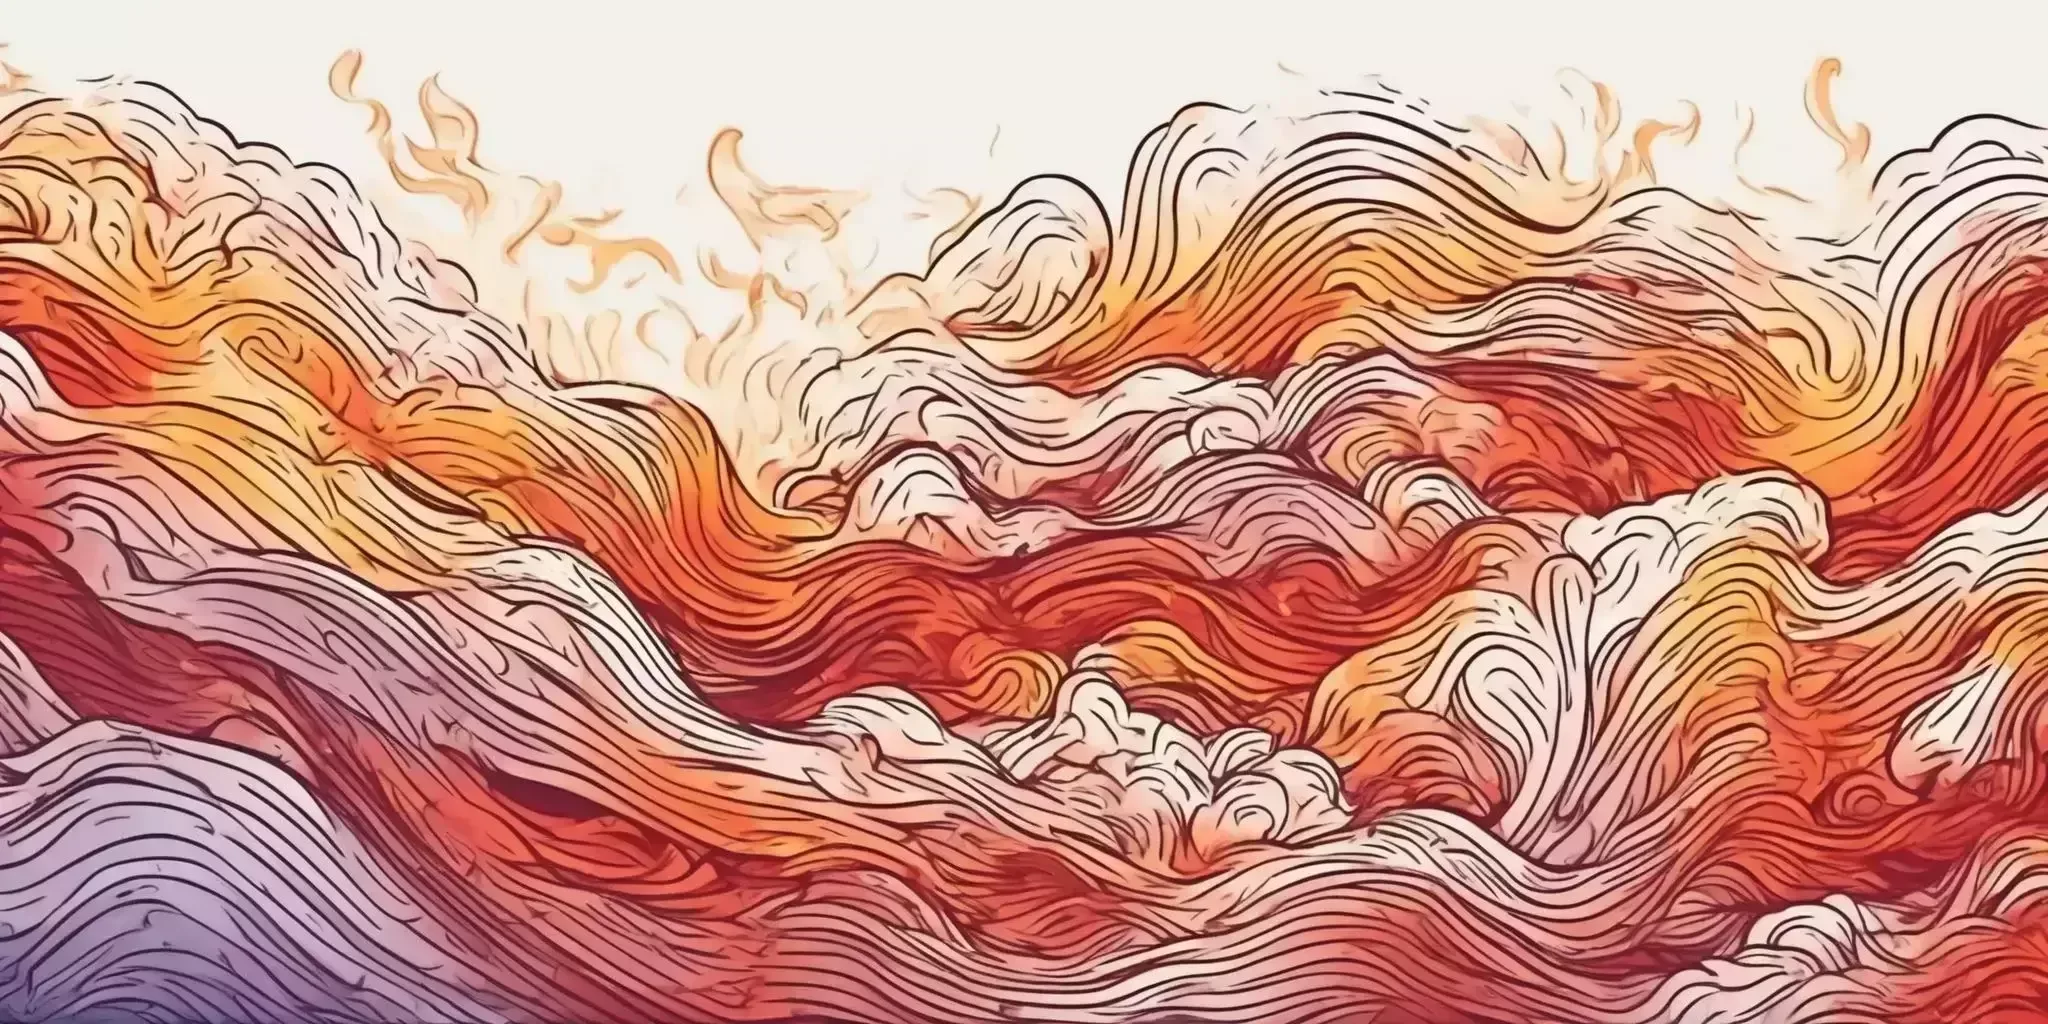 fire in illustration style with gradients and white background